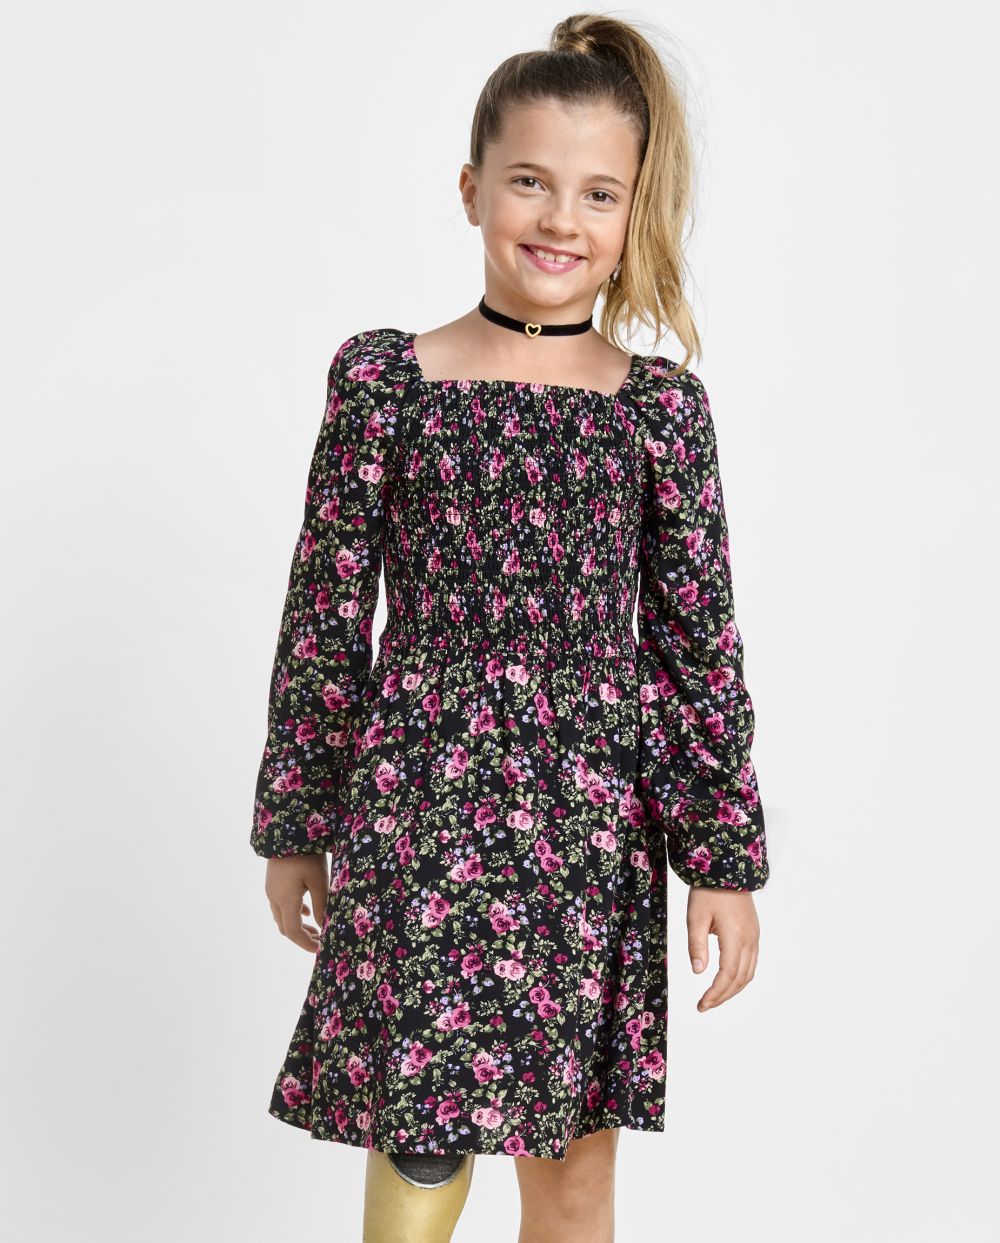 Girls Long Sleeves Rayon Floral Print Smocked Square Neck Above the Knee Dress